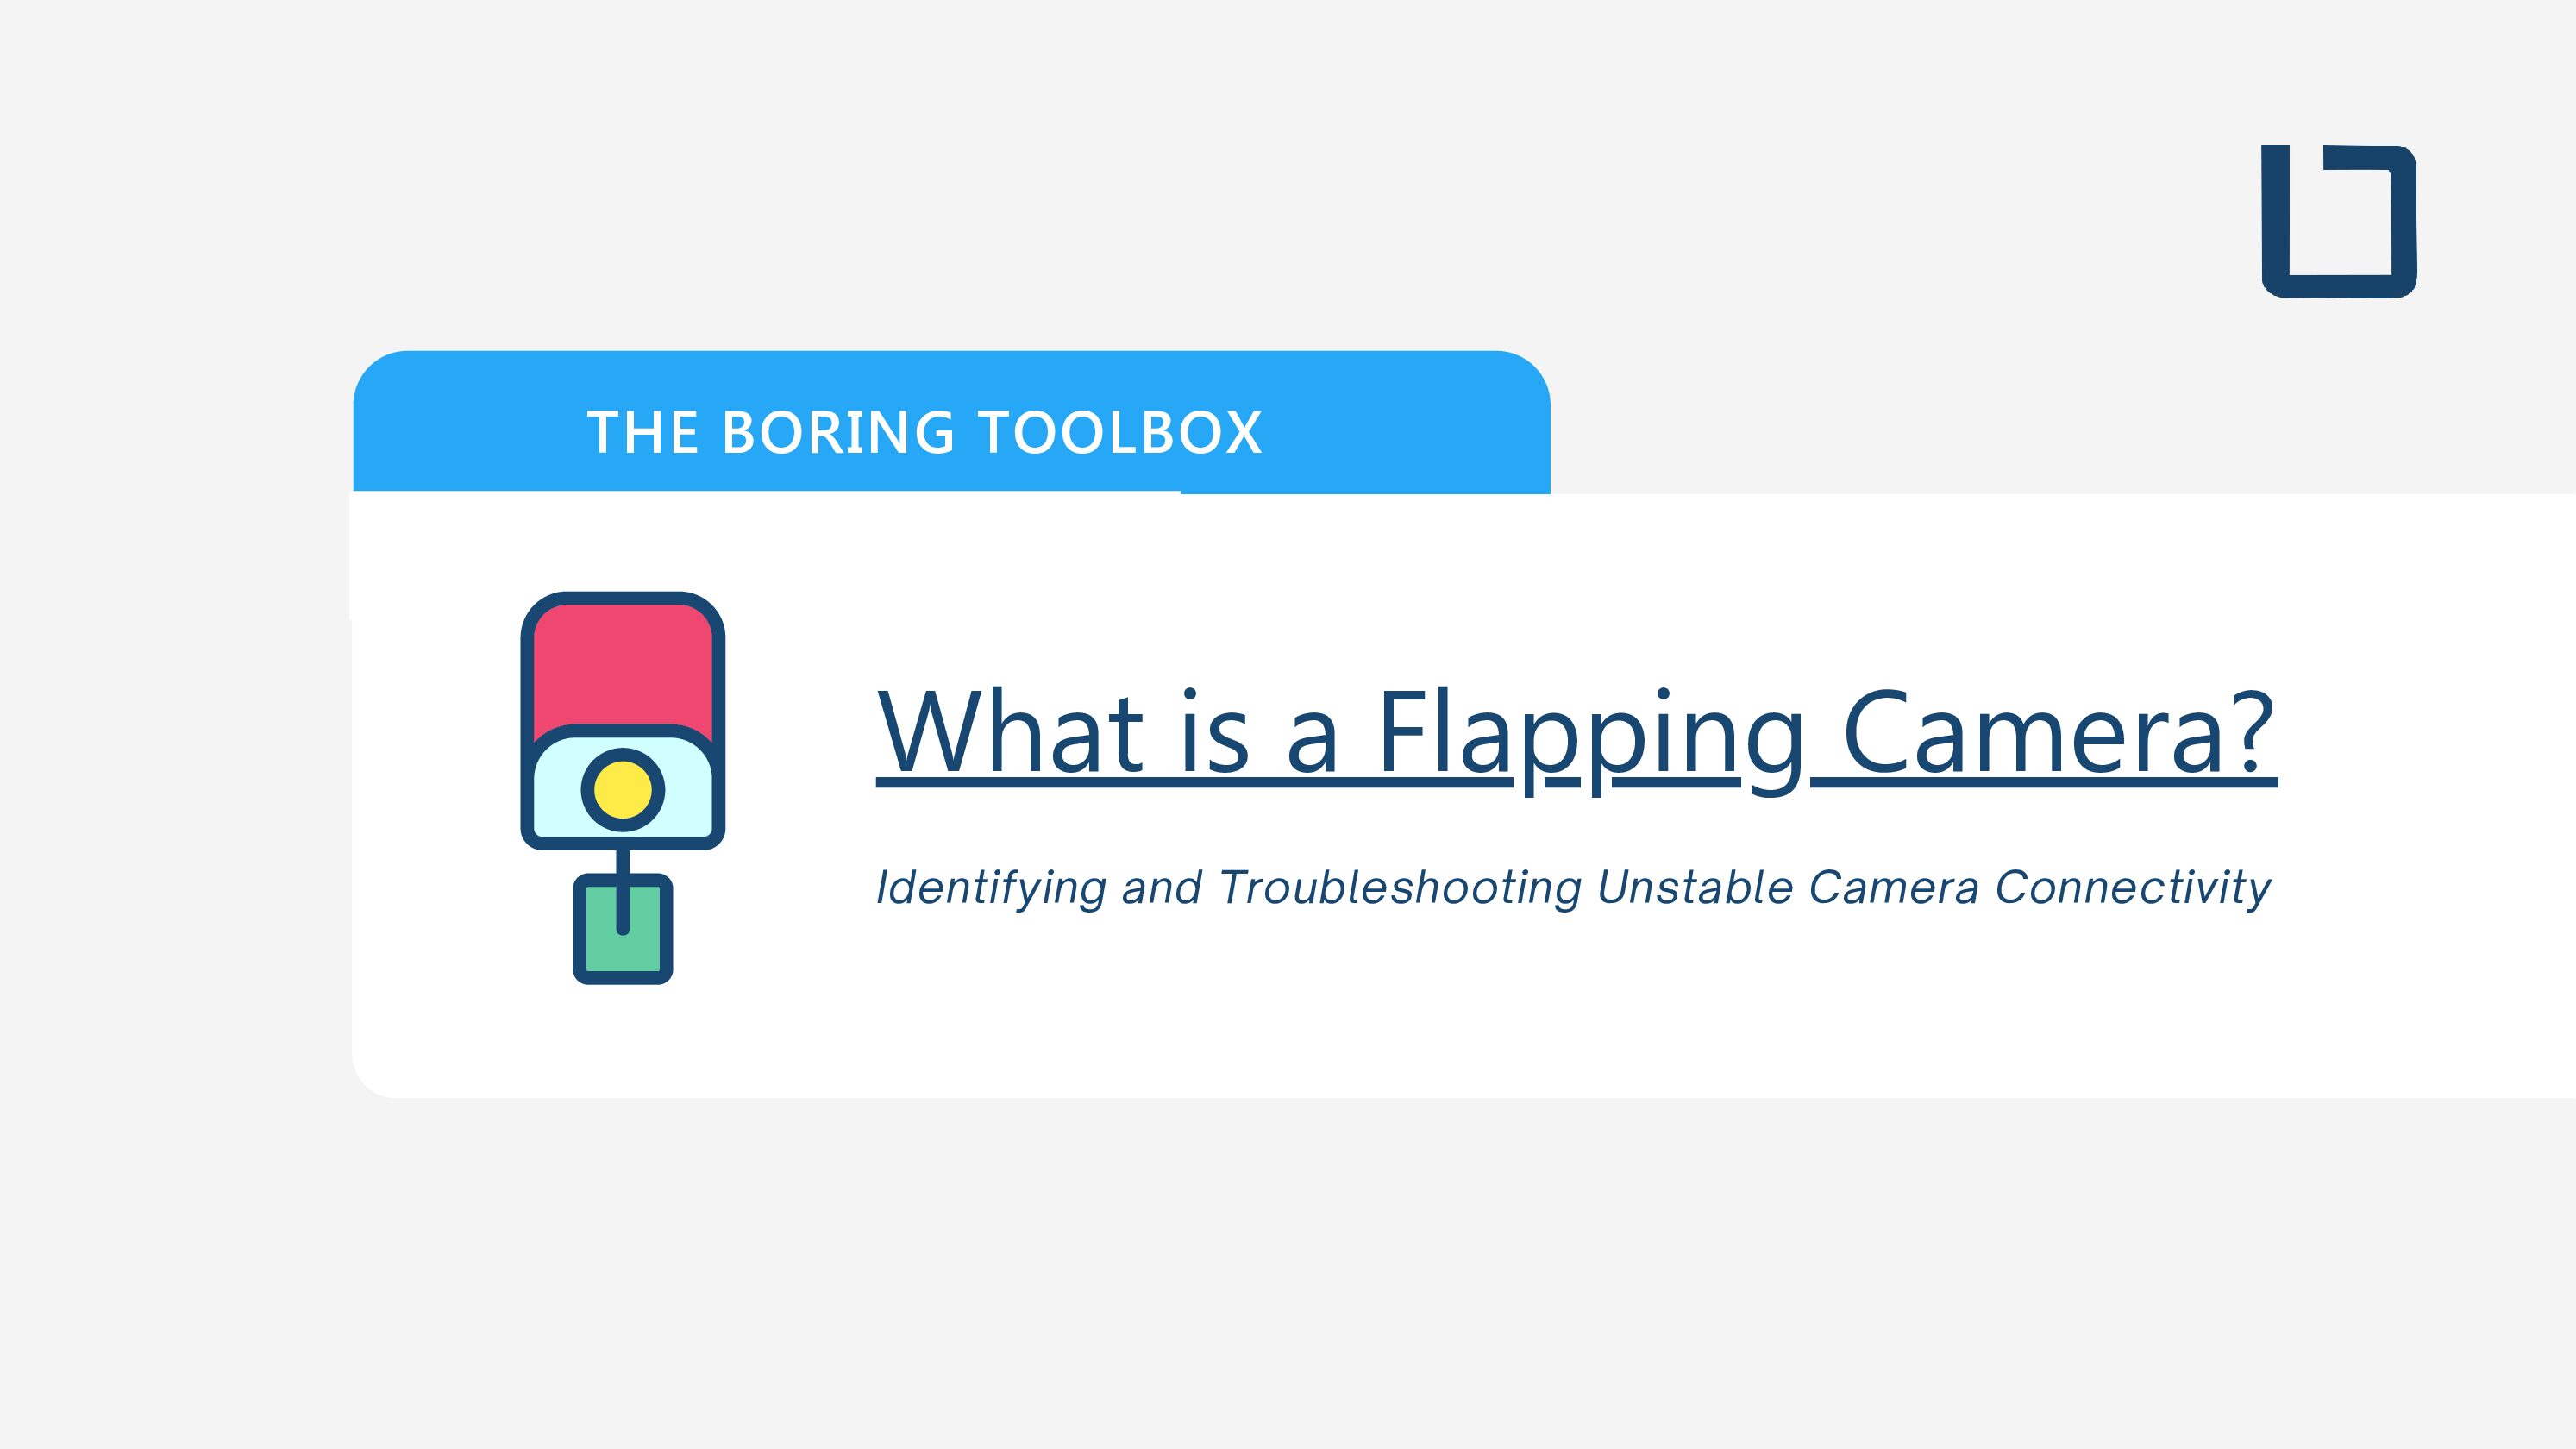 What Is a ‘Flapping Camera’?